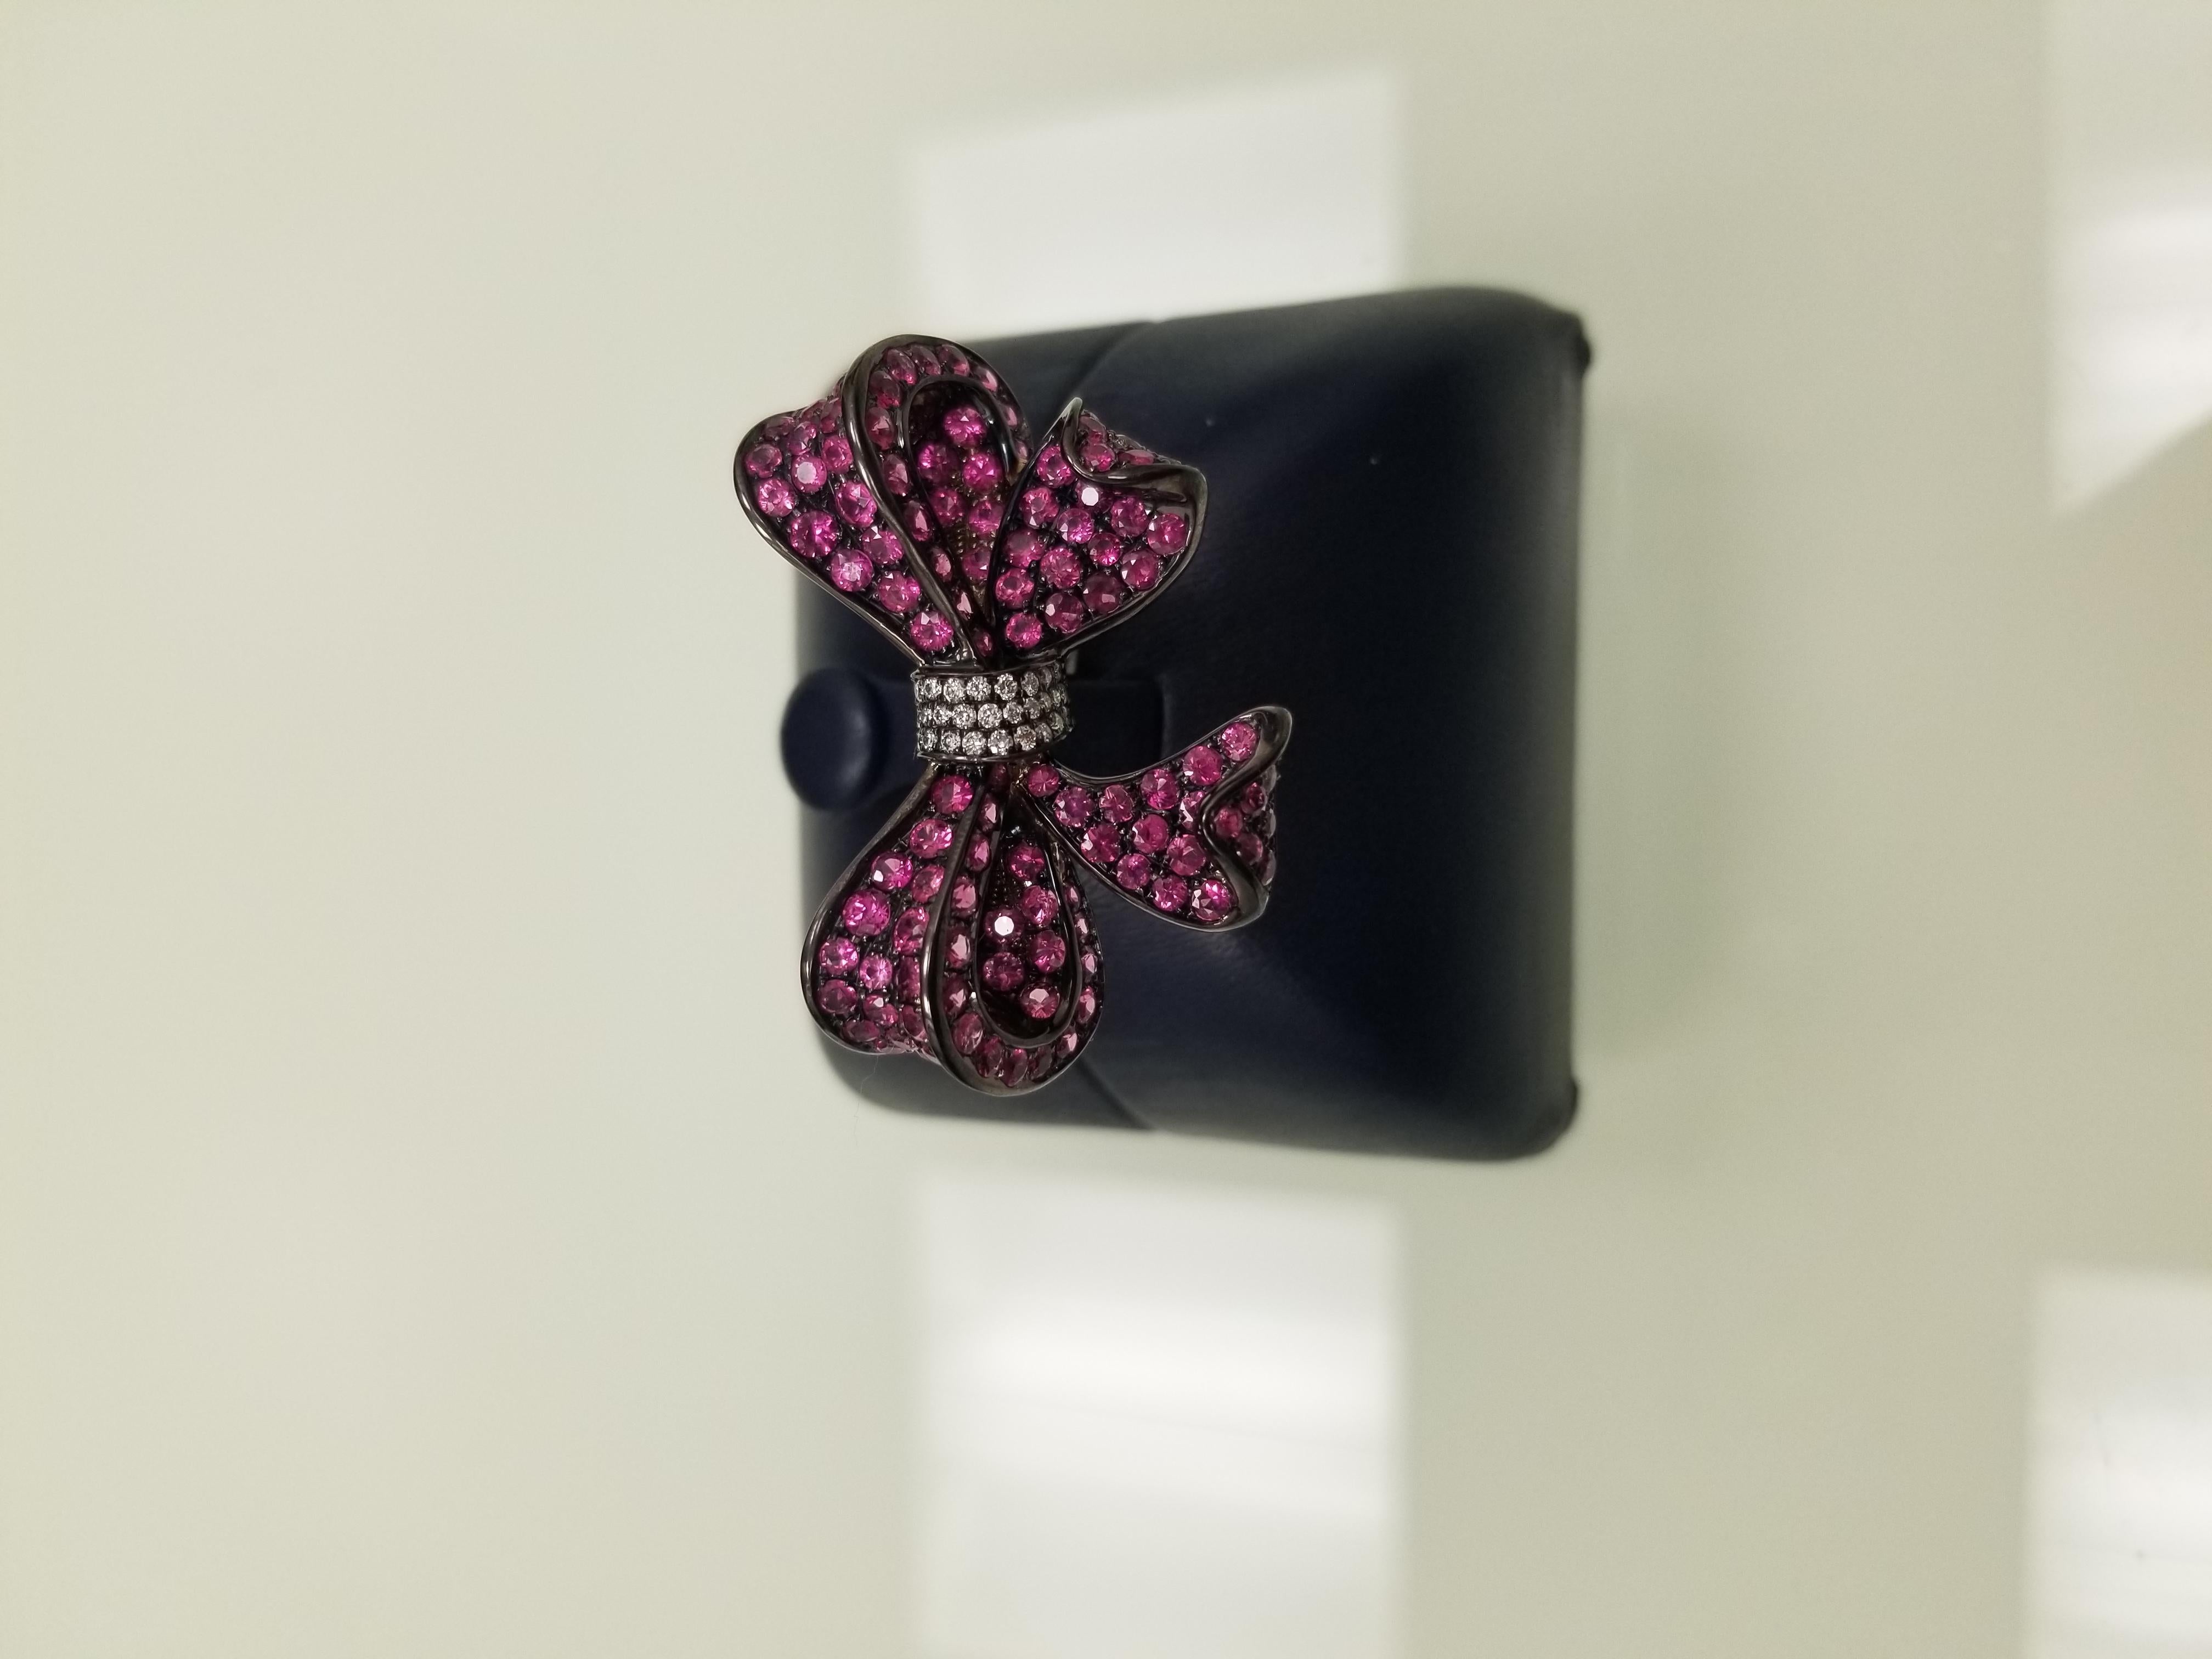 This ring will surely help you unwrap any presents one of a kind made with 18 carrot gold oxidized to make it black is that with find ruby's and diamonds. This ring will surely be one of her favorite pieces to wear on night outs. 

